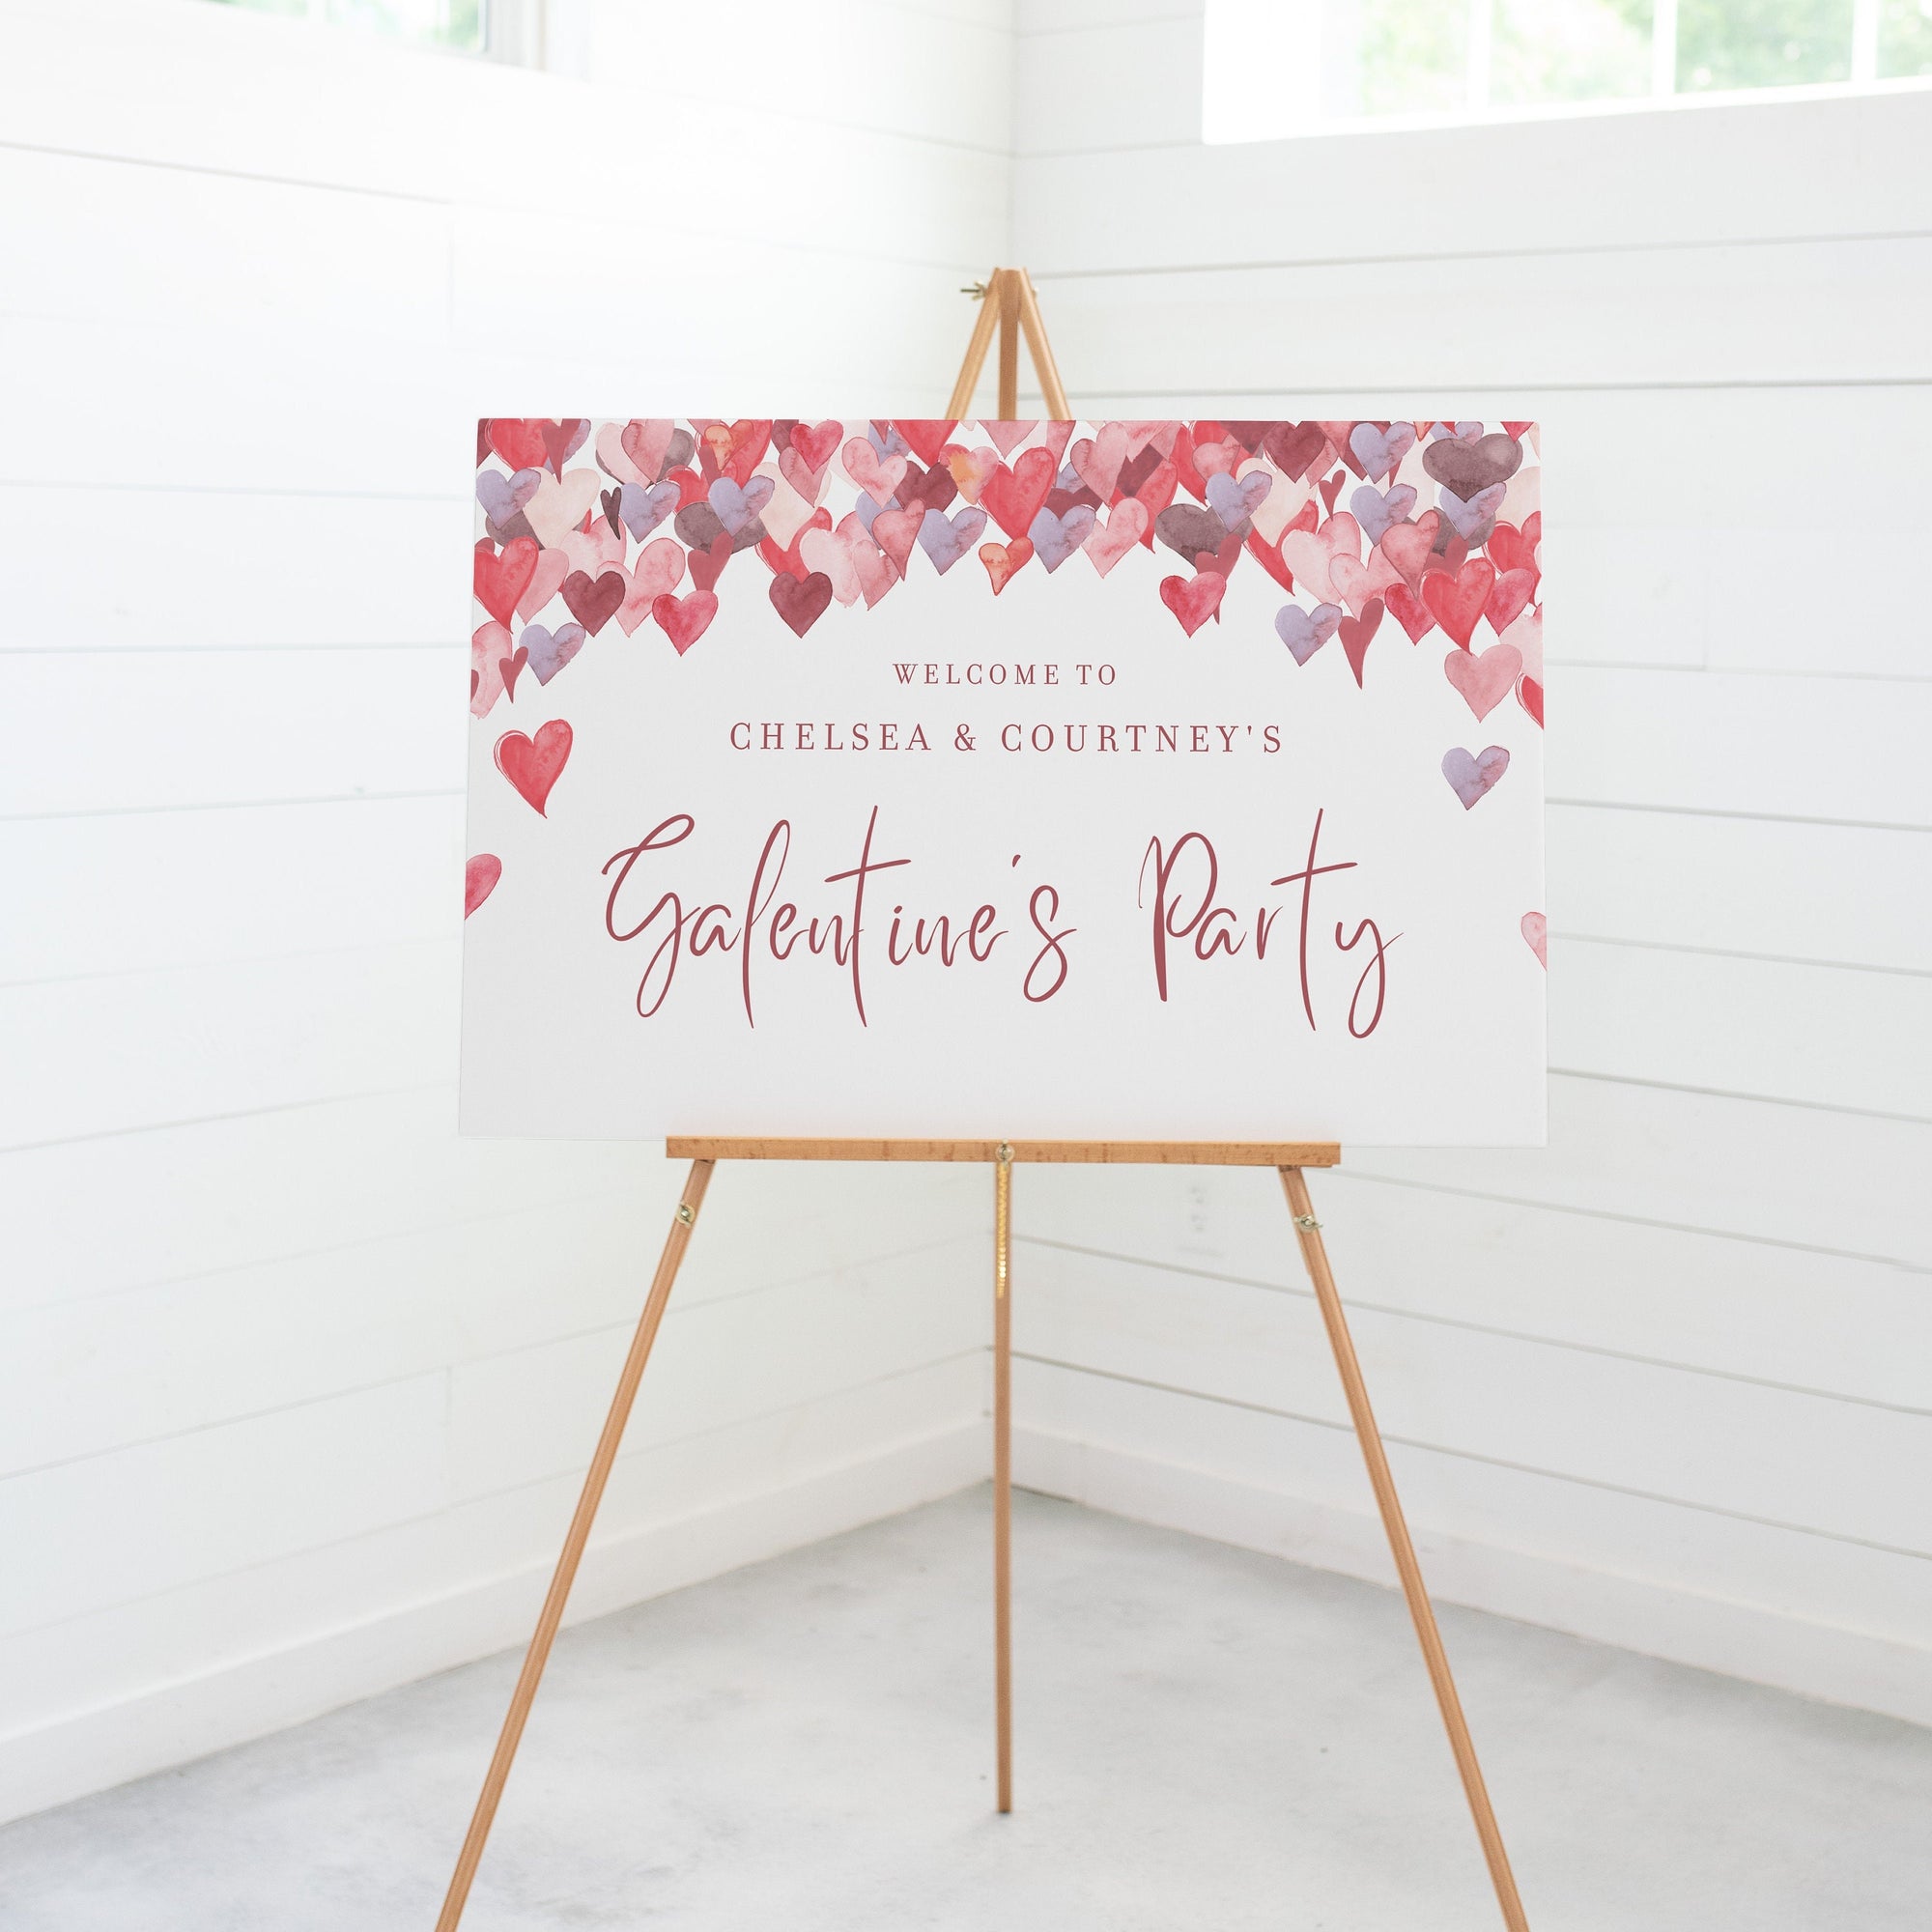 Galentines Day Party Welcome Sign Template, Printable Galentines Party Sign, Galentines Day Decorations, INSTANT DOWNLOAD - VH100